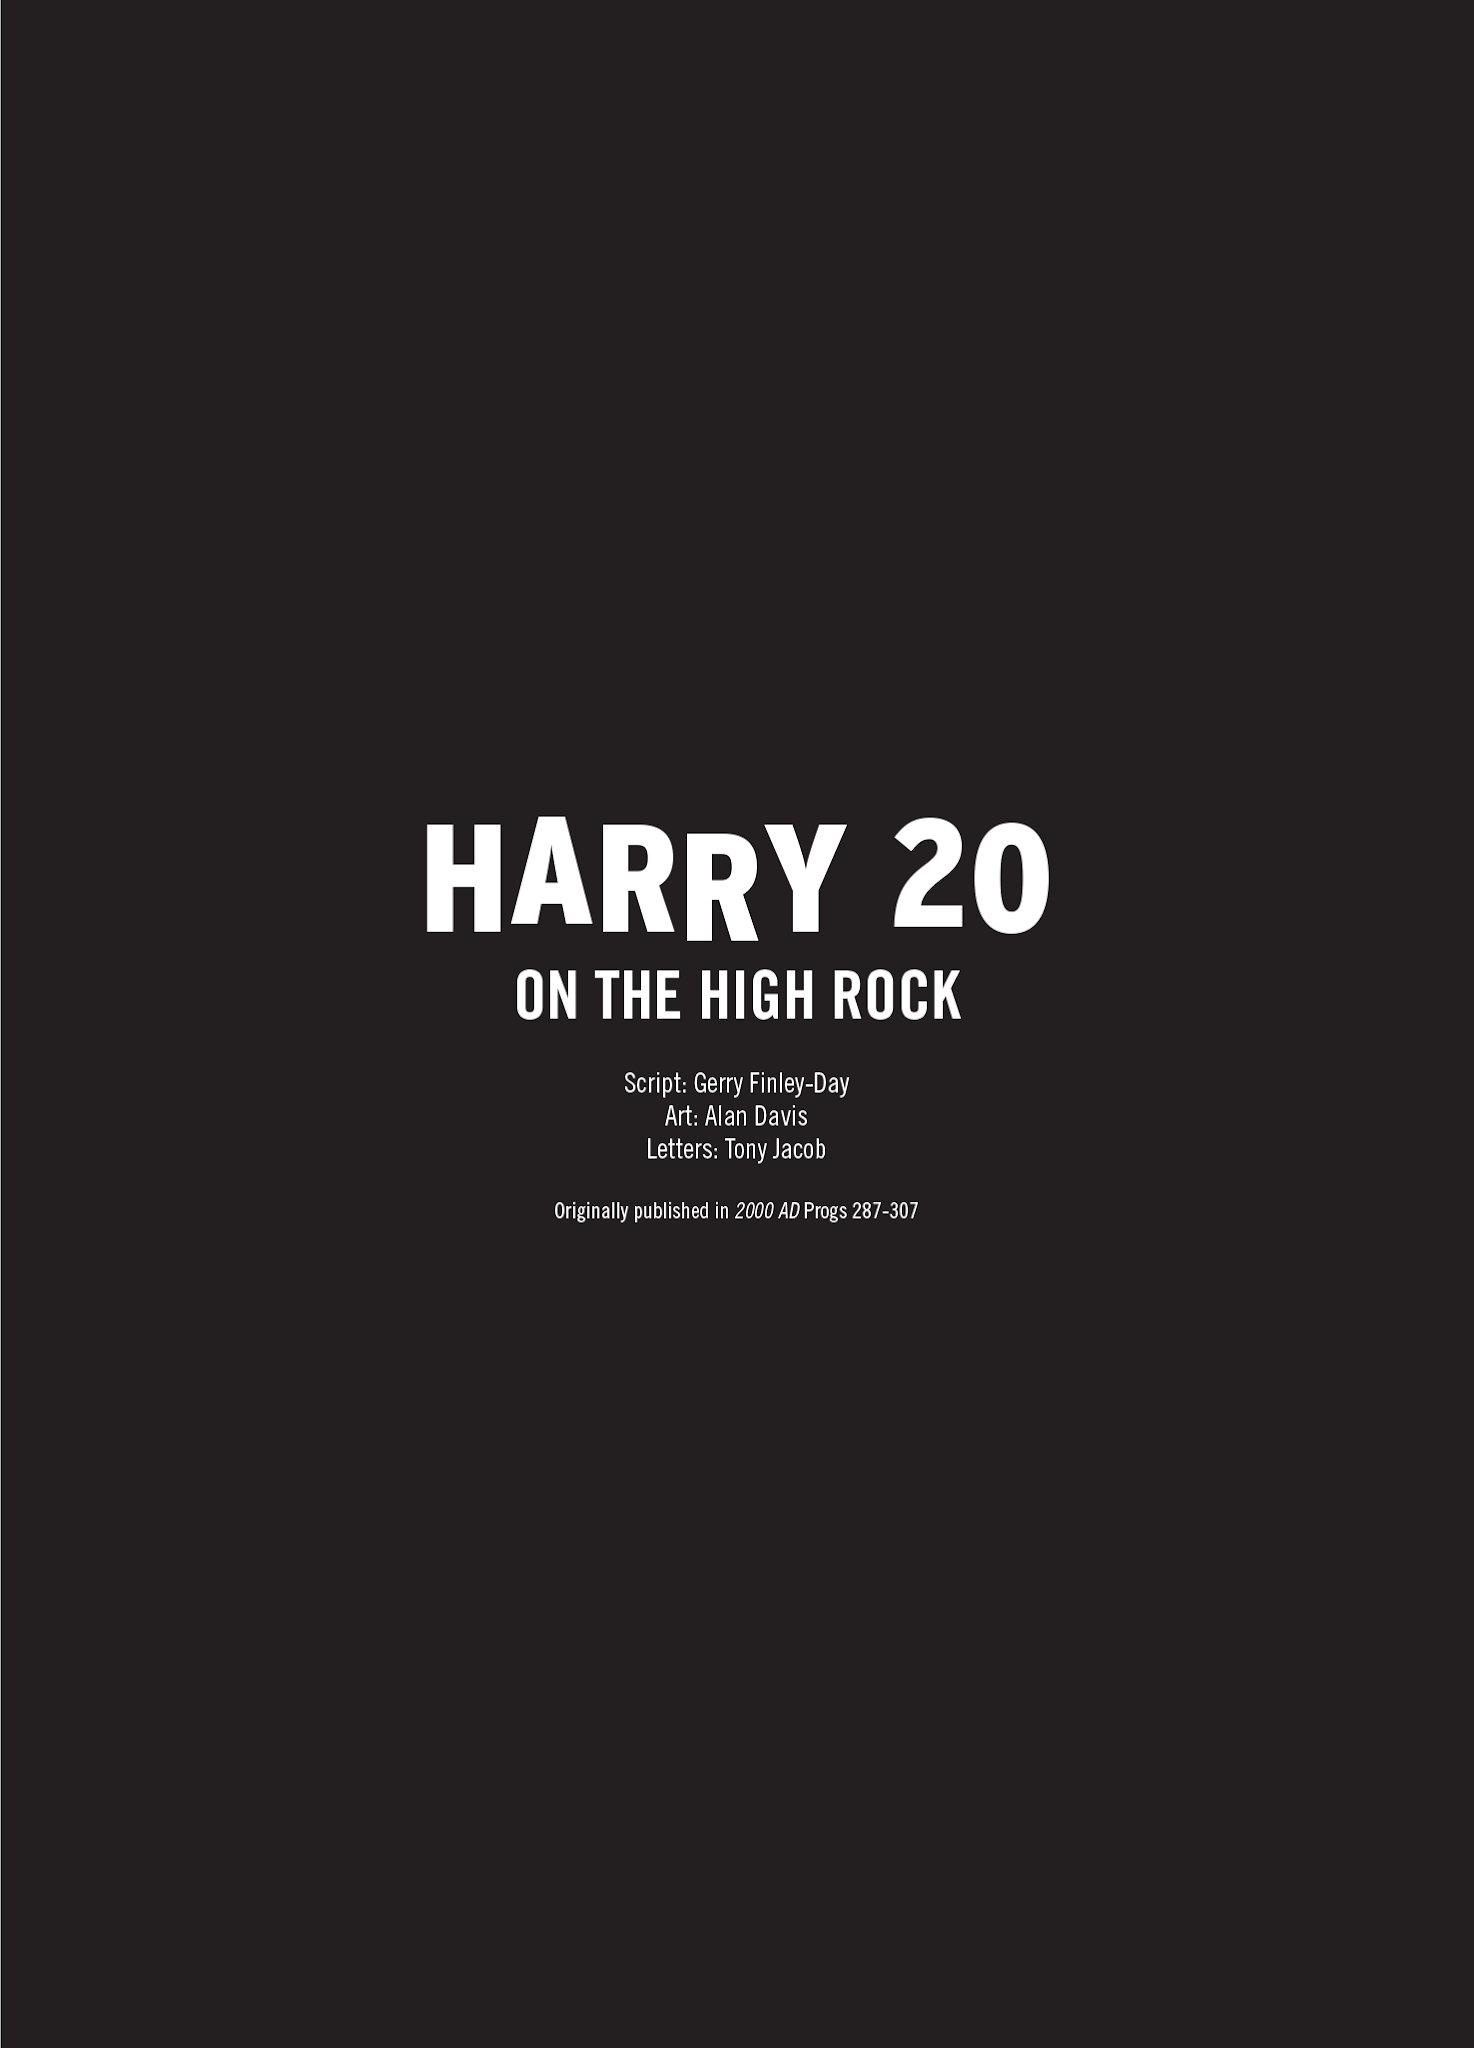 Read online Harry 20 on the High Rock comic -  Issue # TPB - 7